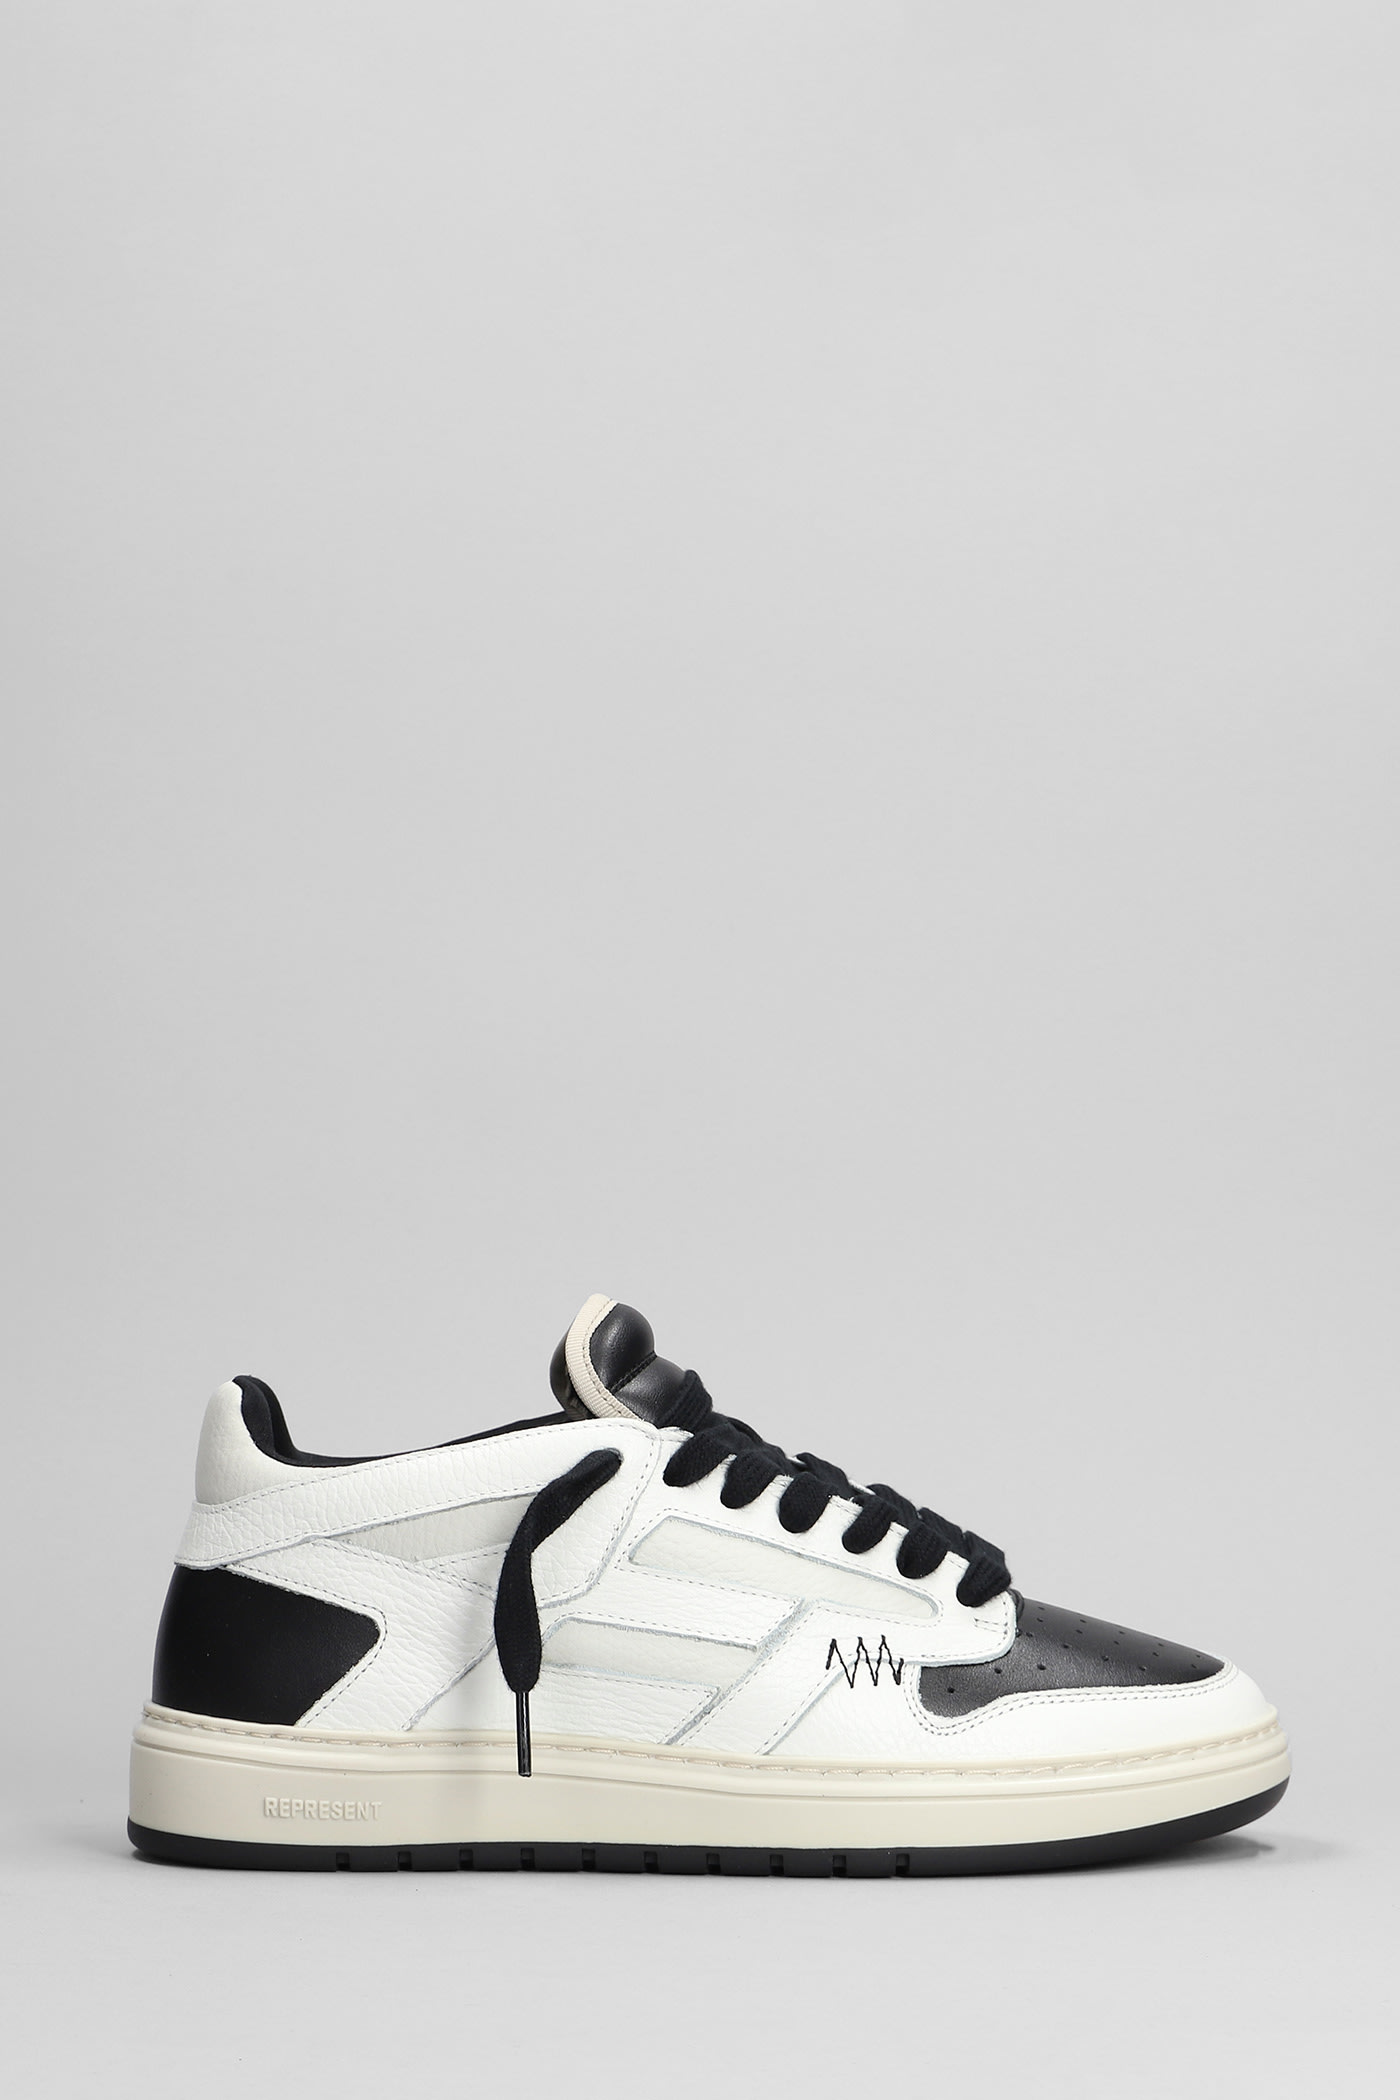 REPRESENT REPTOR SNEAKERS IN WHITE LEATHER